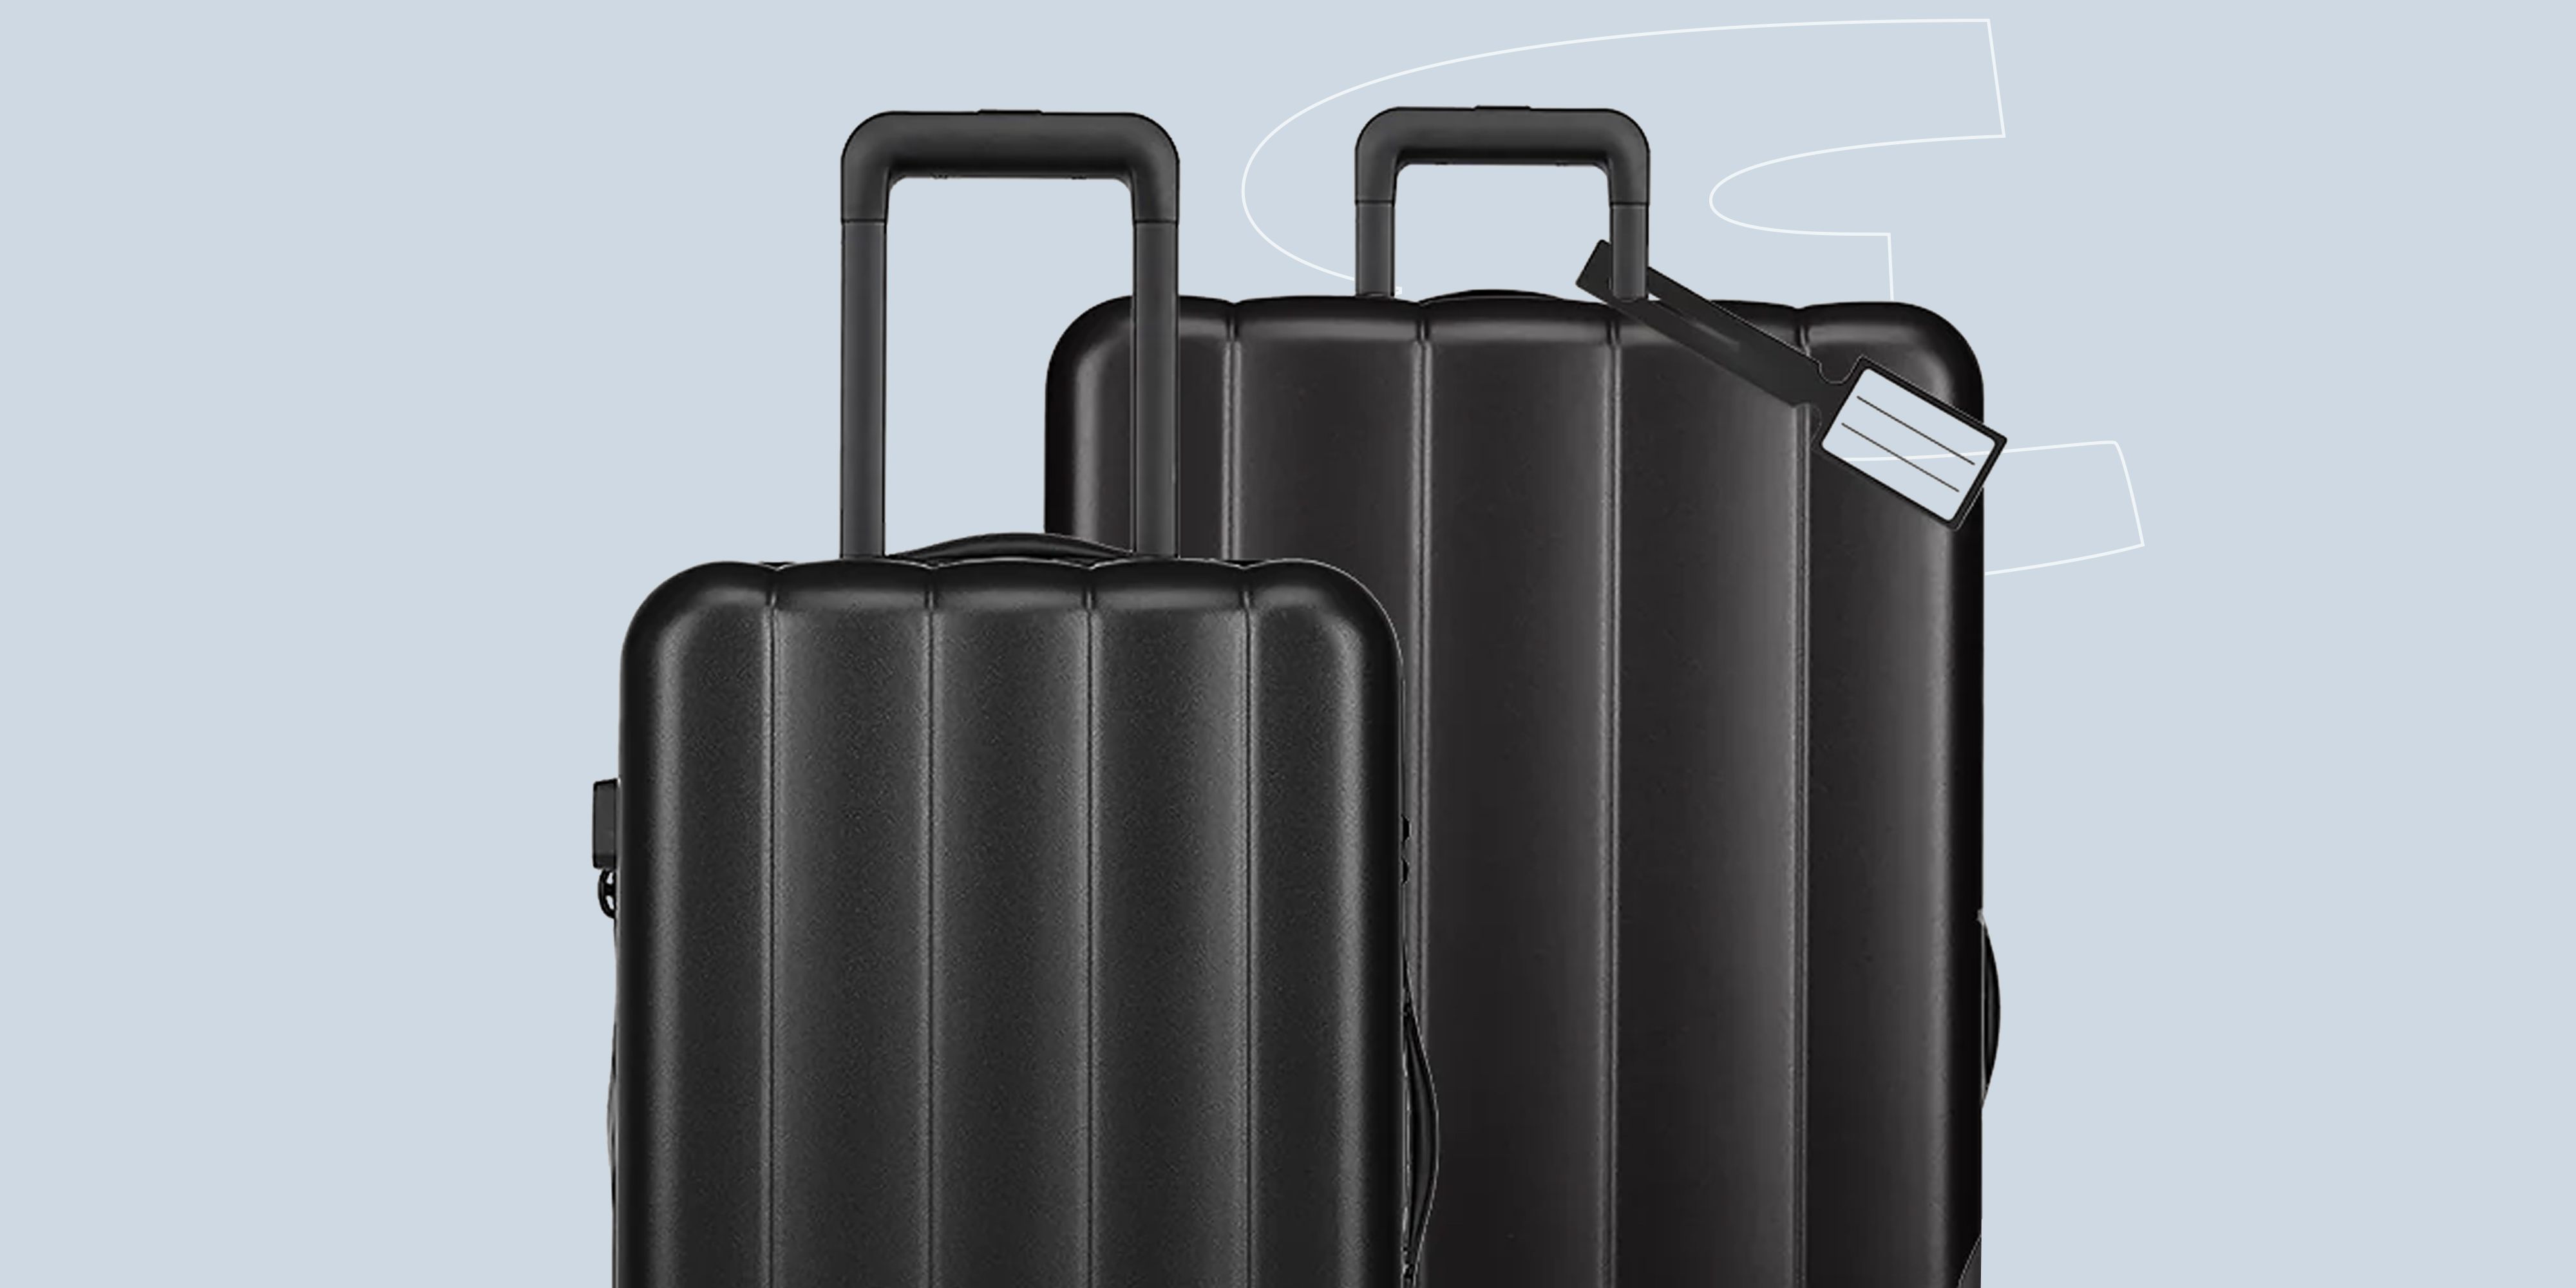 The best early Black Friday luggage deals for your holiday travel - CBS News